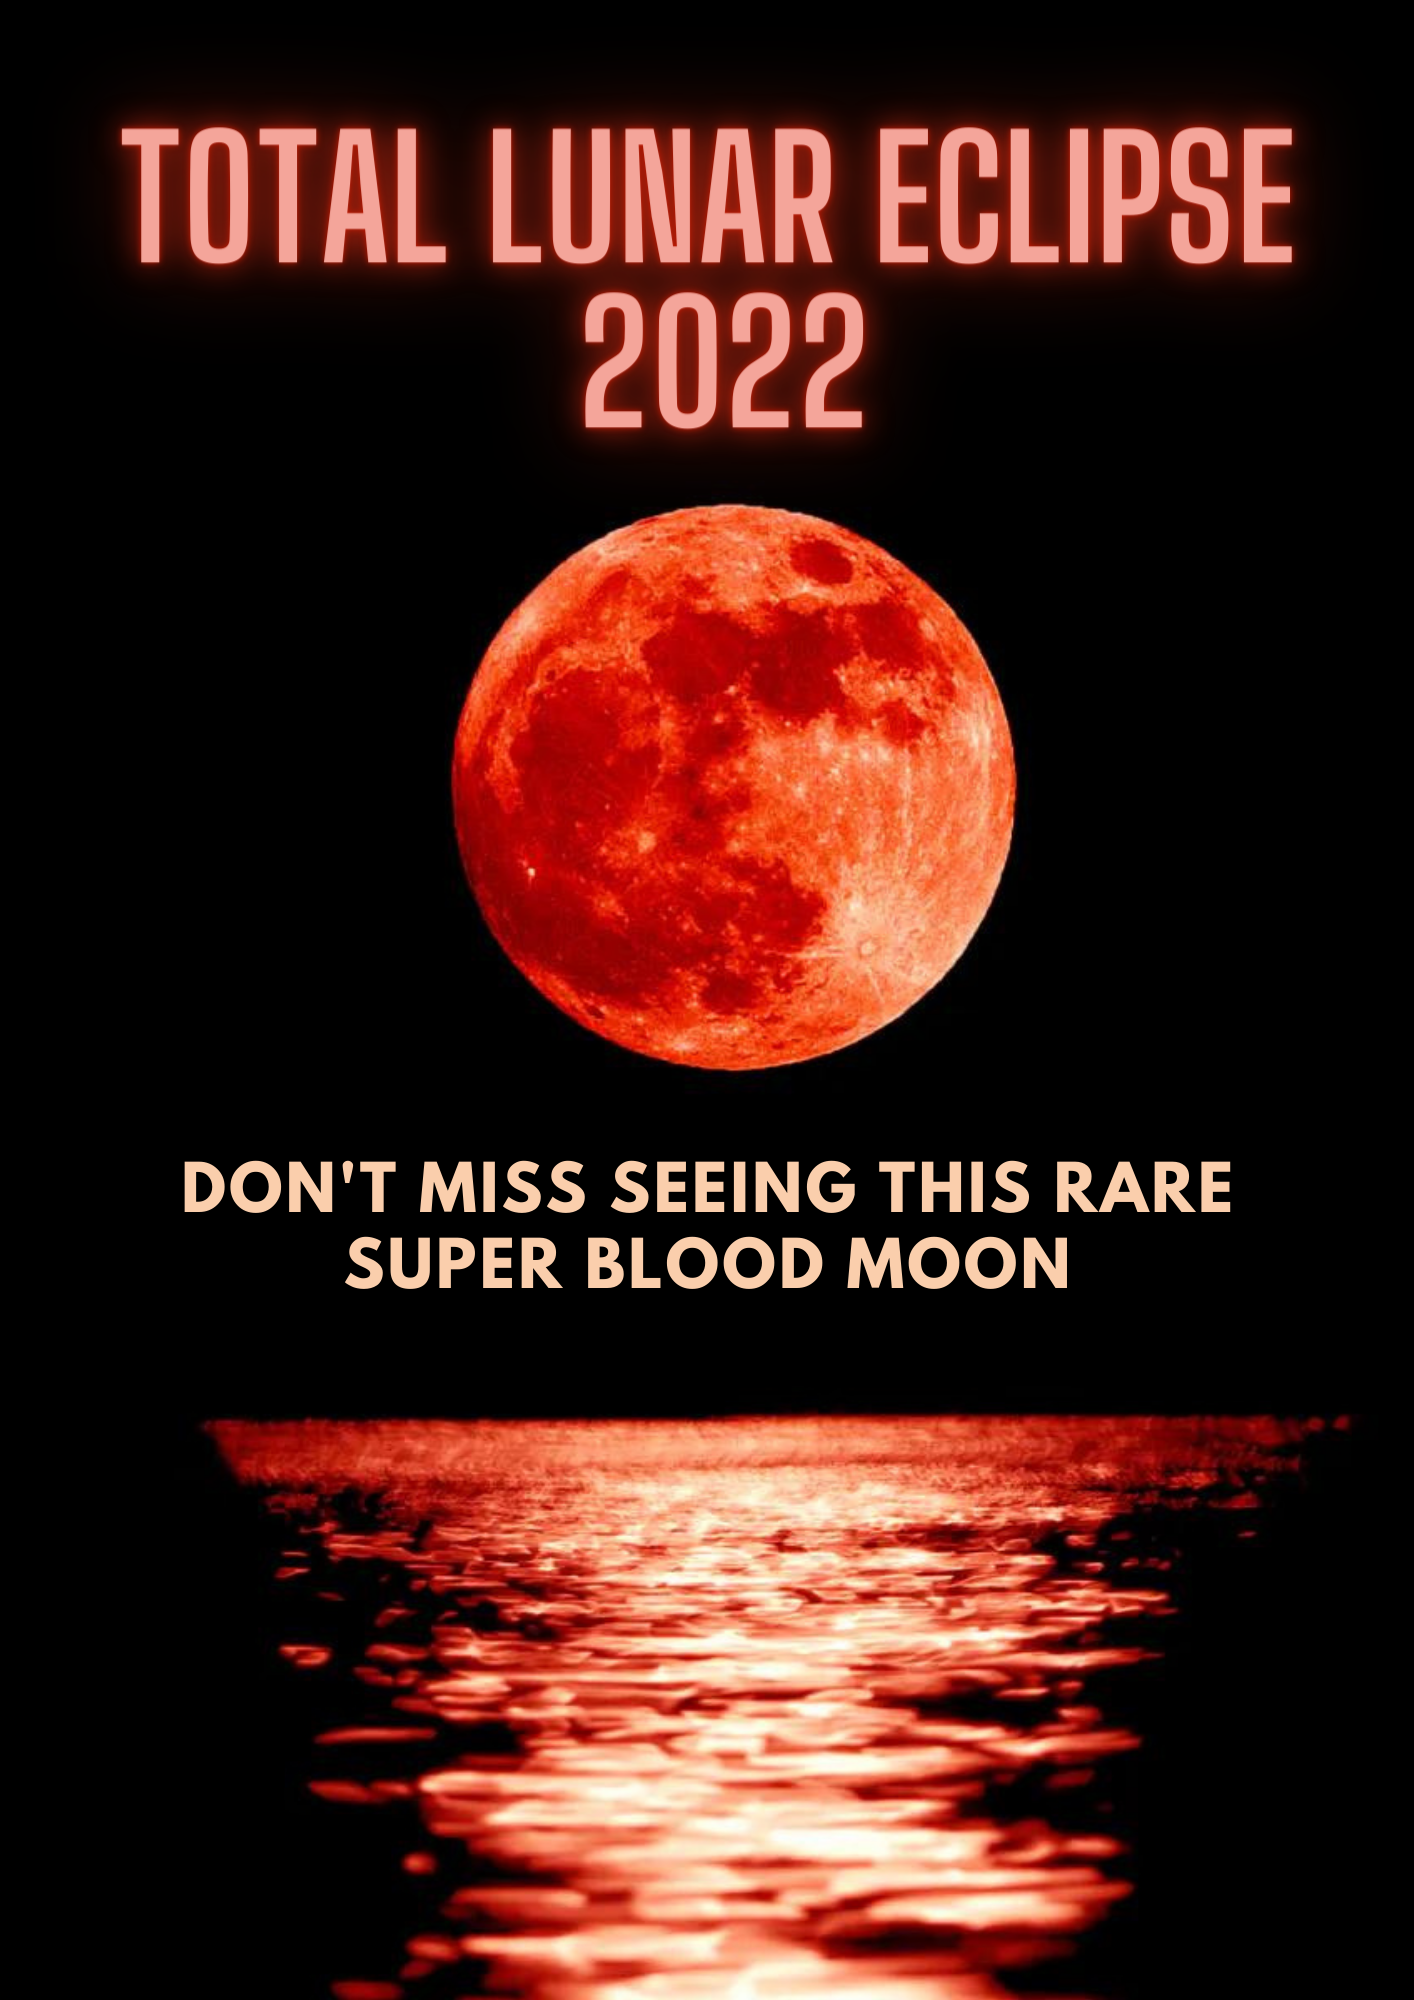 Total Lunar Eclipse 2022 - Don't Miss Seeing This Rare Super Blood Moon